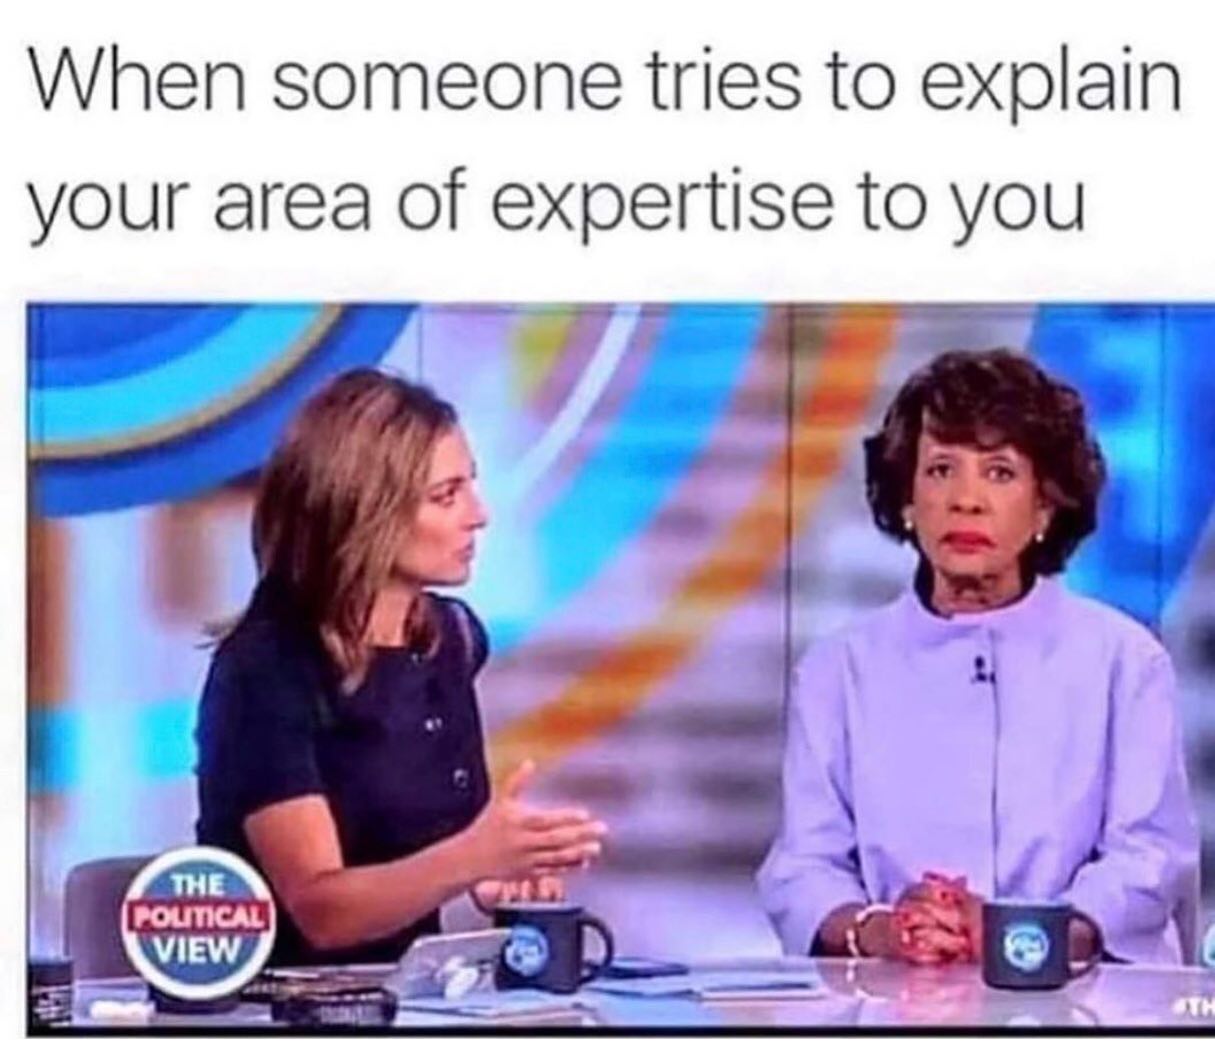 when someone tries to explain your area of expertise to you